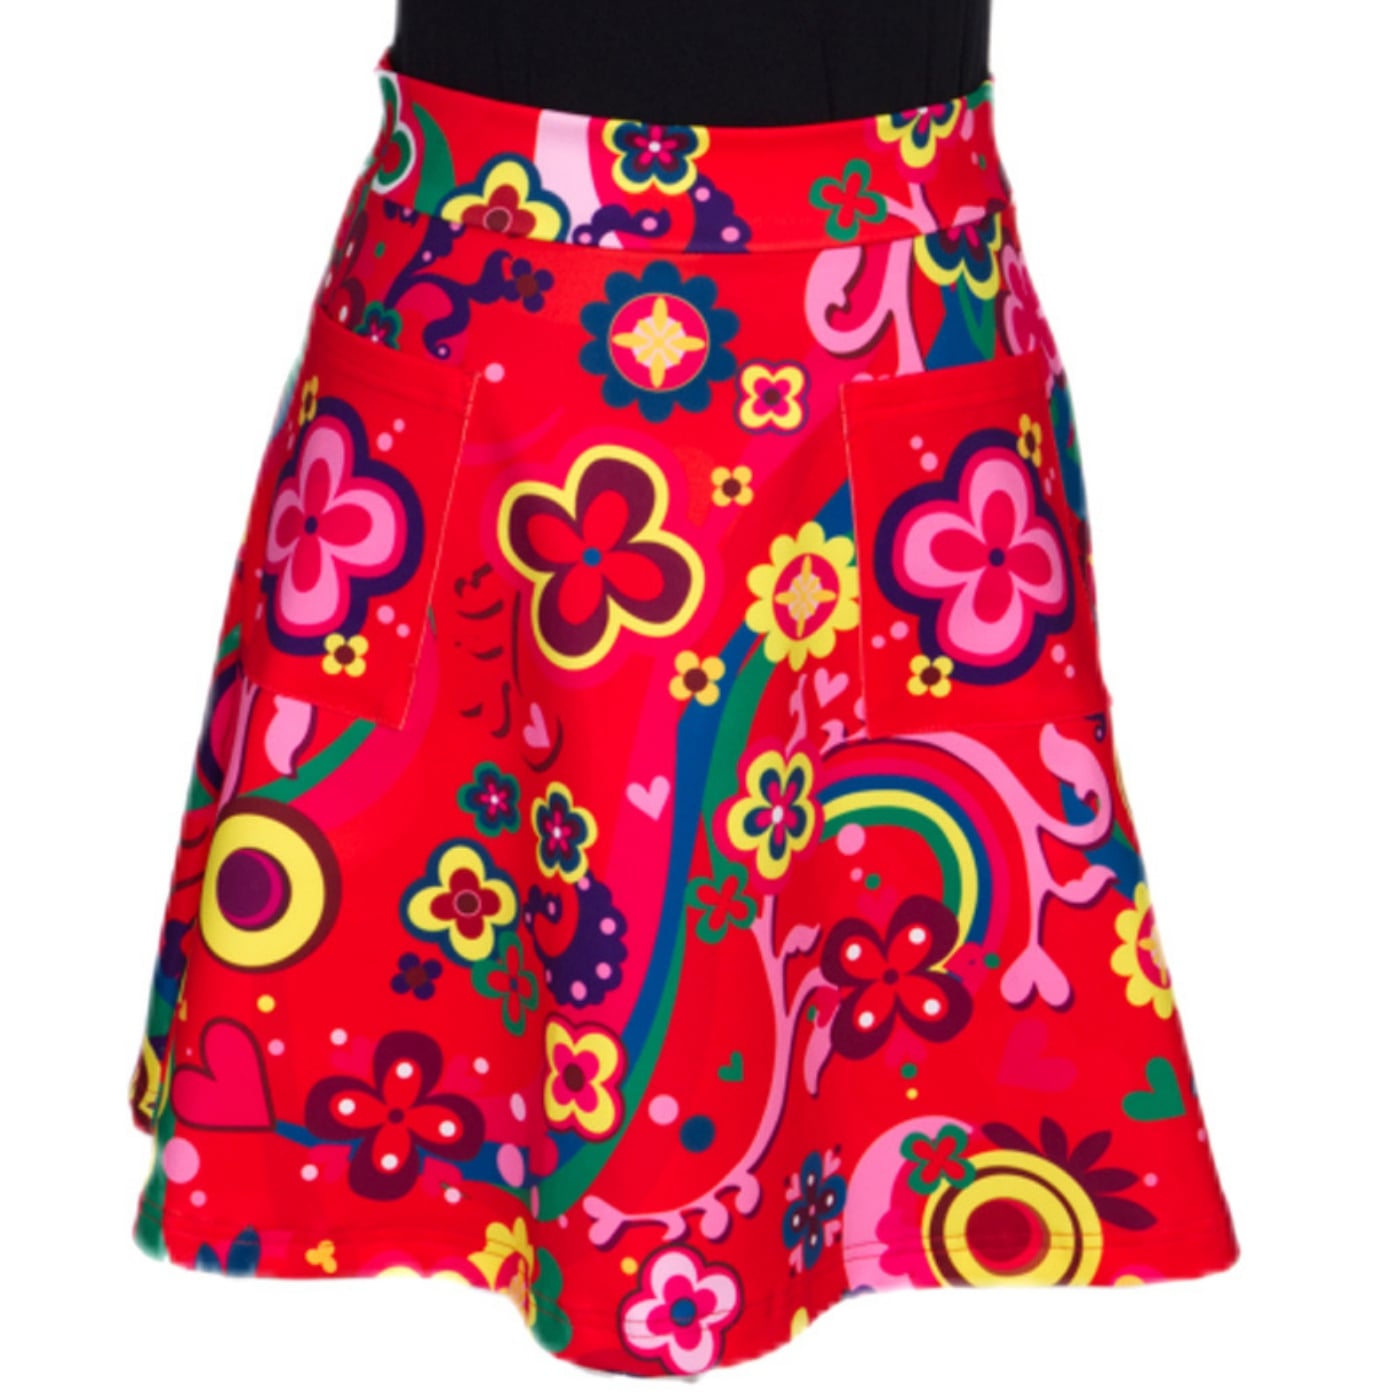 Groovy Remix Short Skirt by RainbowsAndFairies.com.au (Psychedelic - Woodstock - 70s Wallpaper - Kitsch - Aline Skirt With Pockets - Vintage Inspired) - SKU: CL_SHORT_GROOV_REM - Pic-02